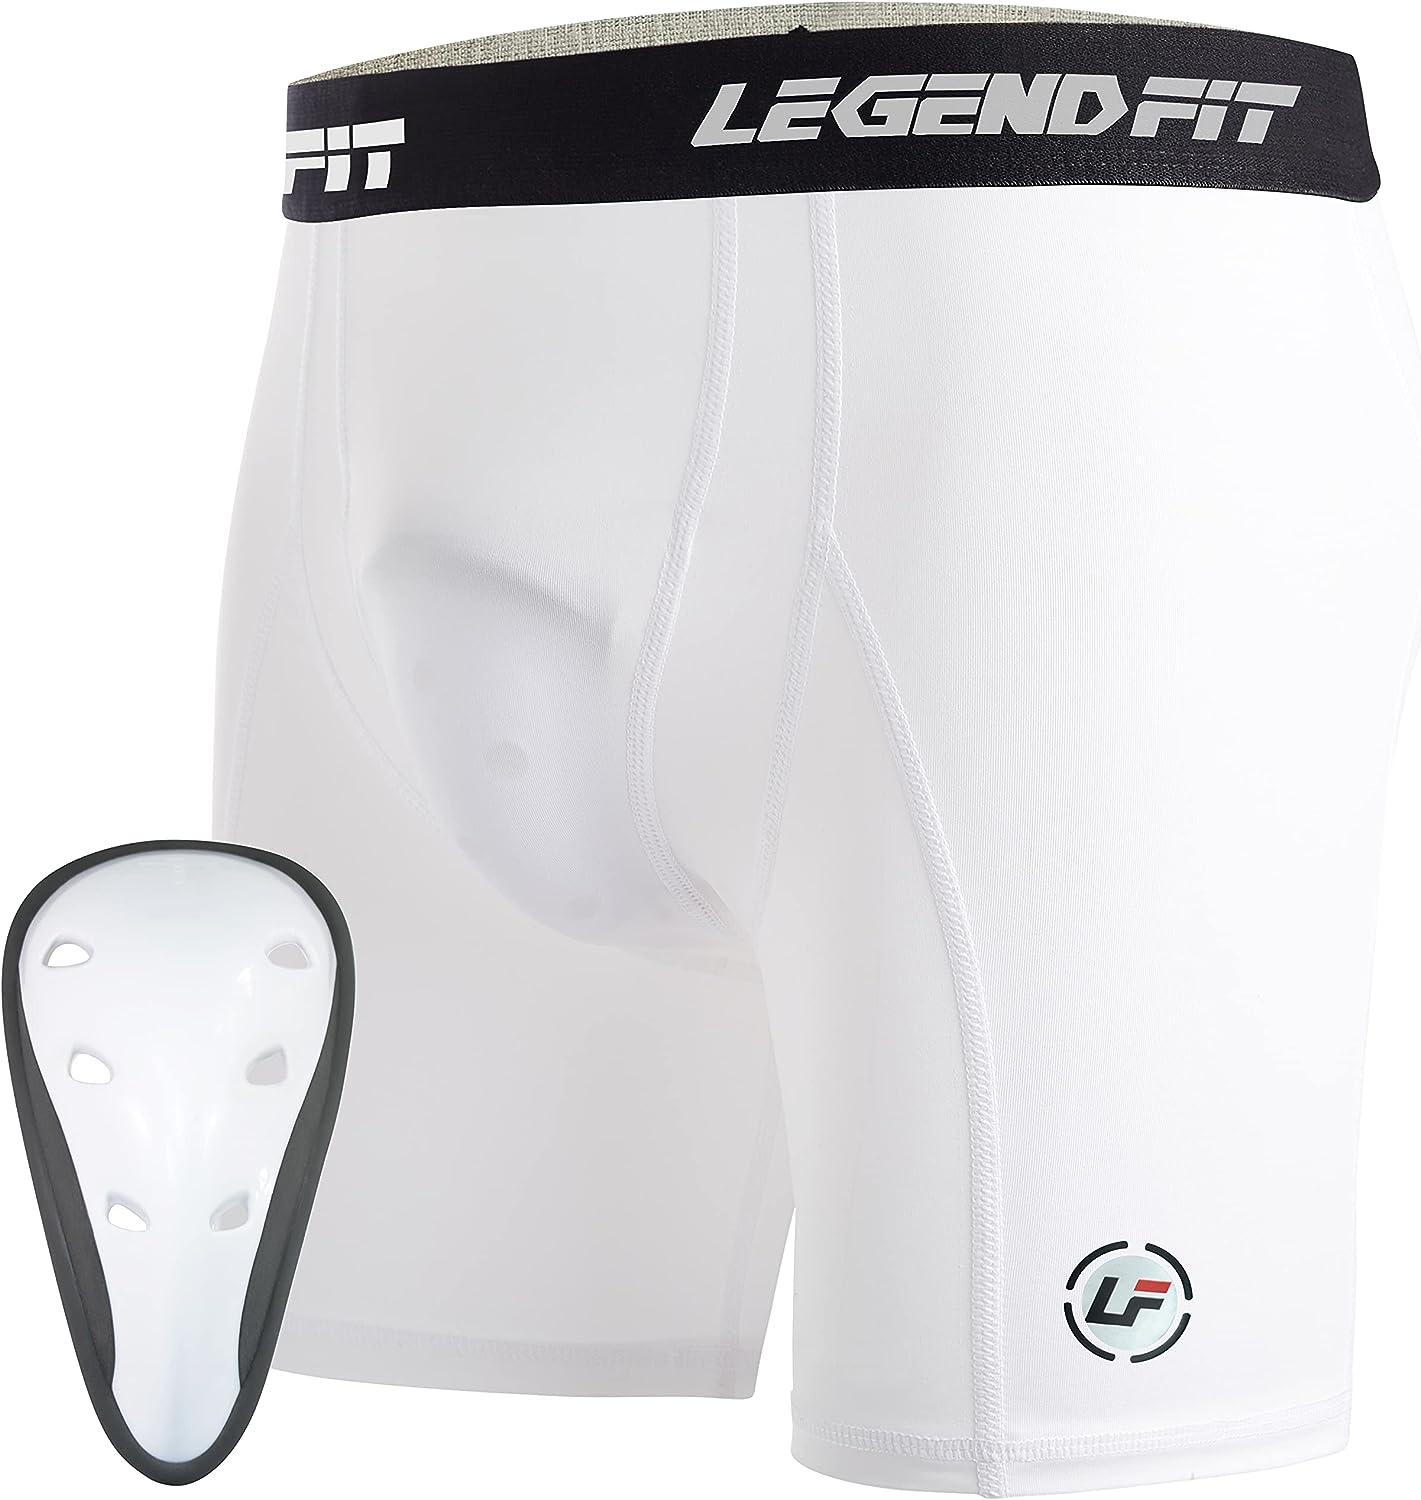  Legendfit Basketball Knee Pads for Kids Youth Adults